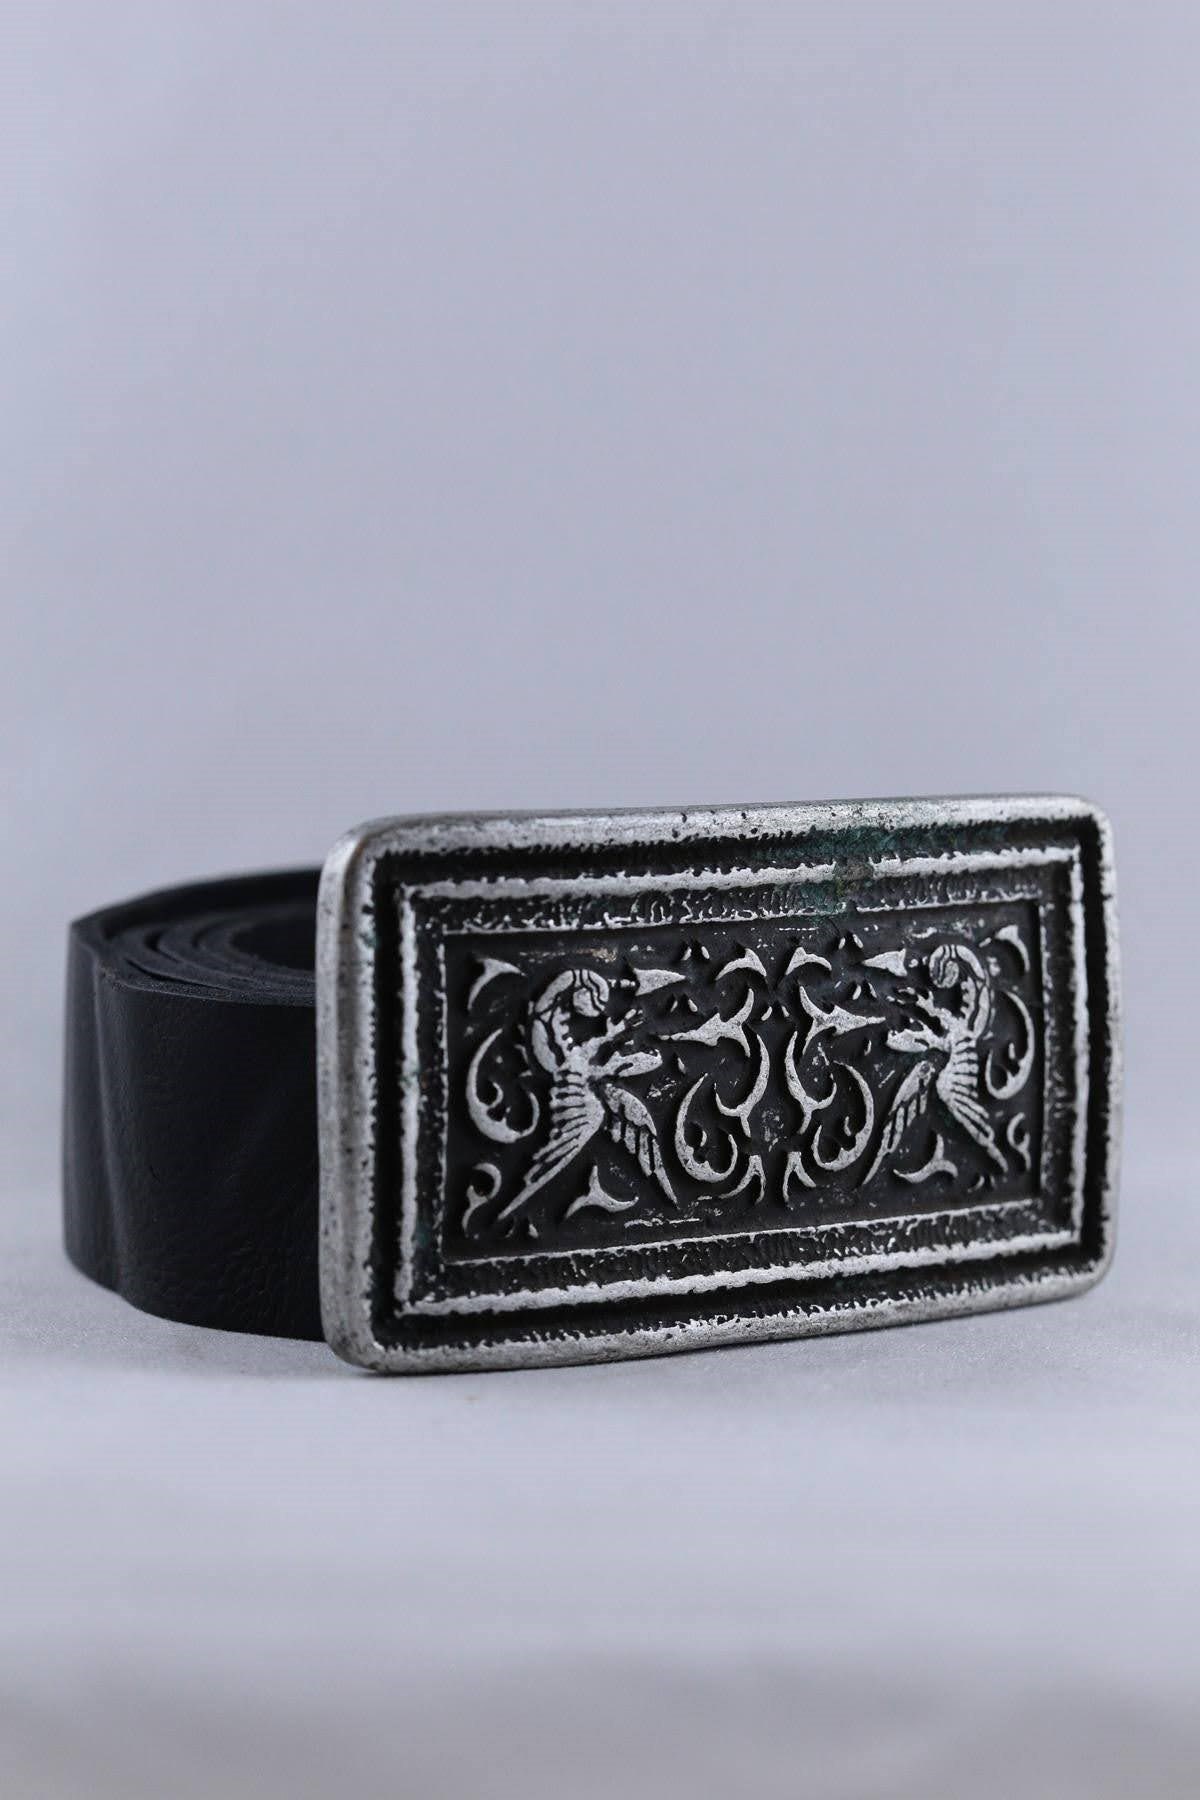 Handmade Buckle Rustic Tumbled Cast Iron Belt Buckle and